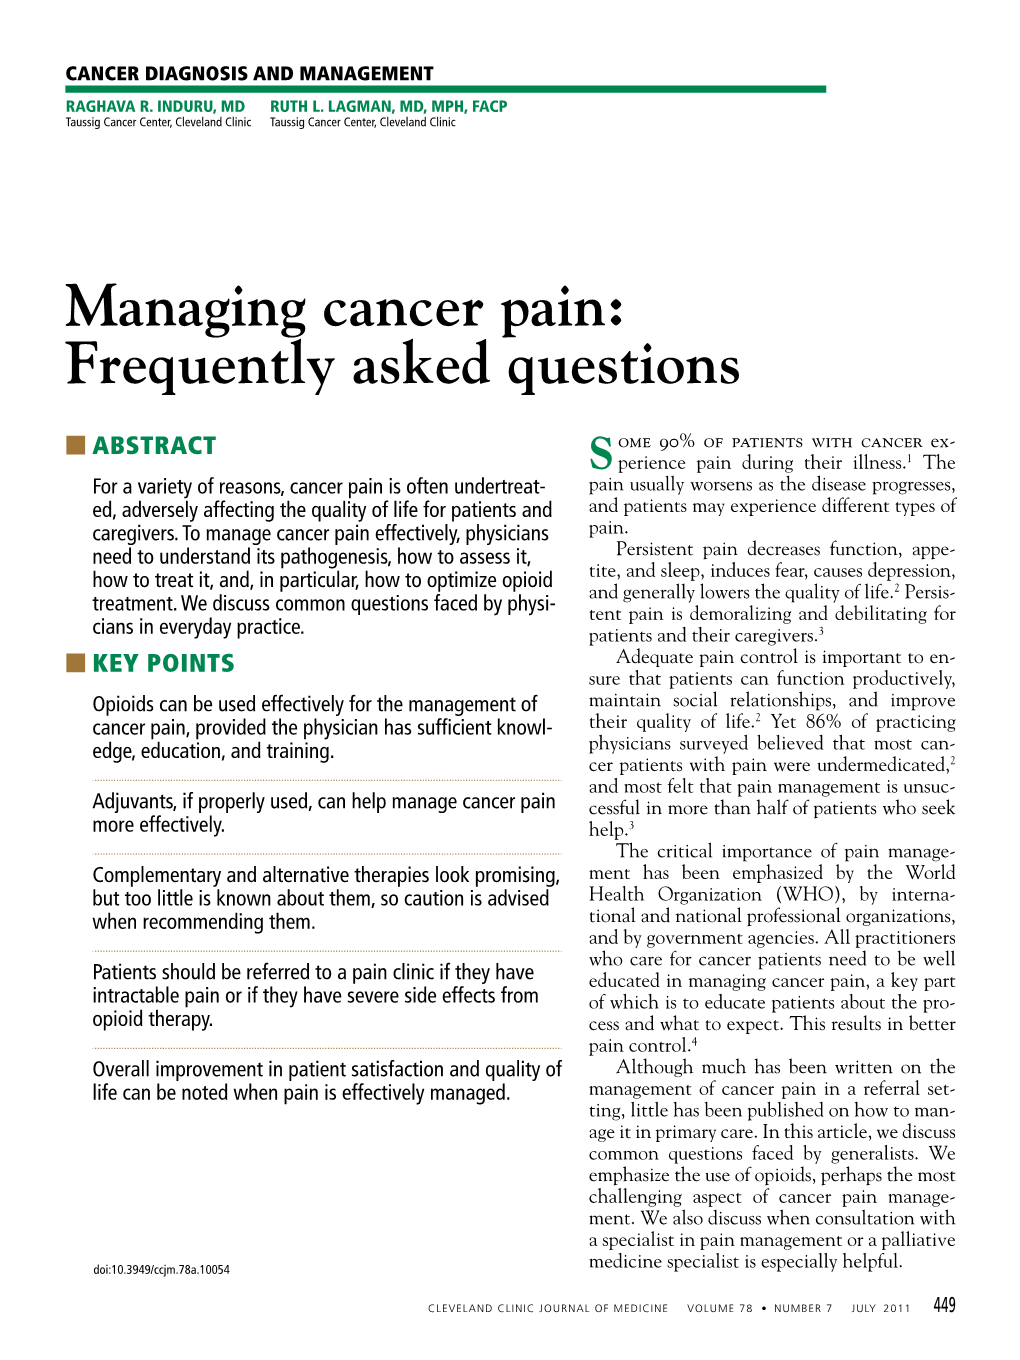 Managing Cancer Pain: Frequently Asked Questions